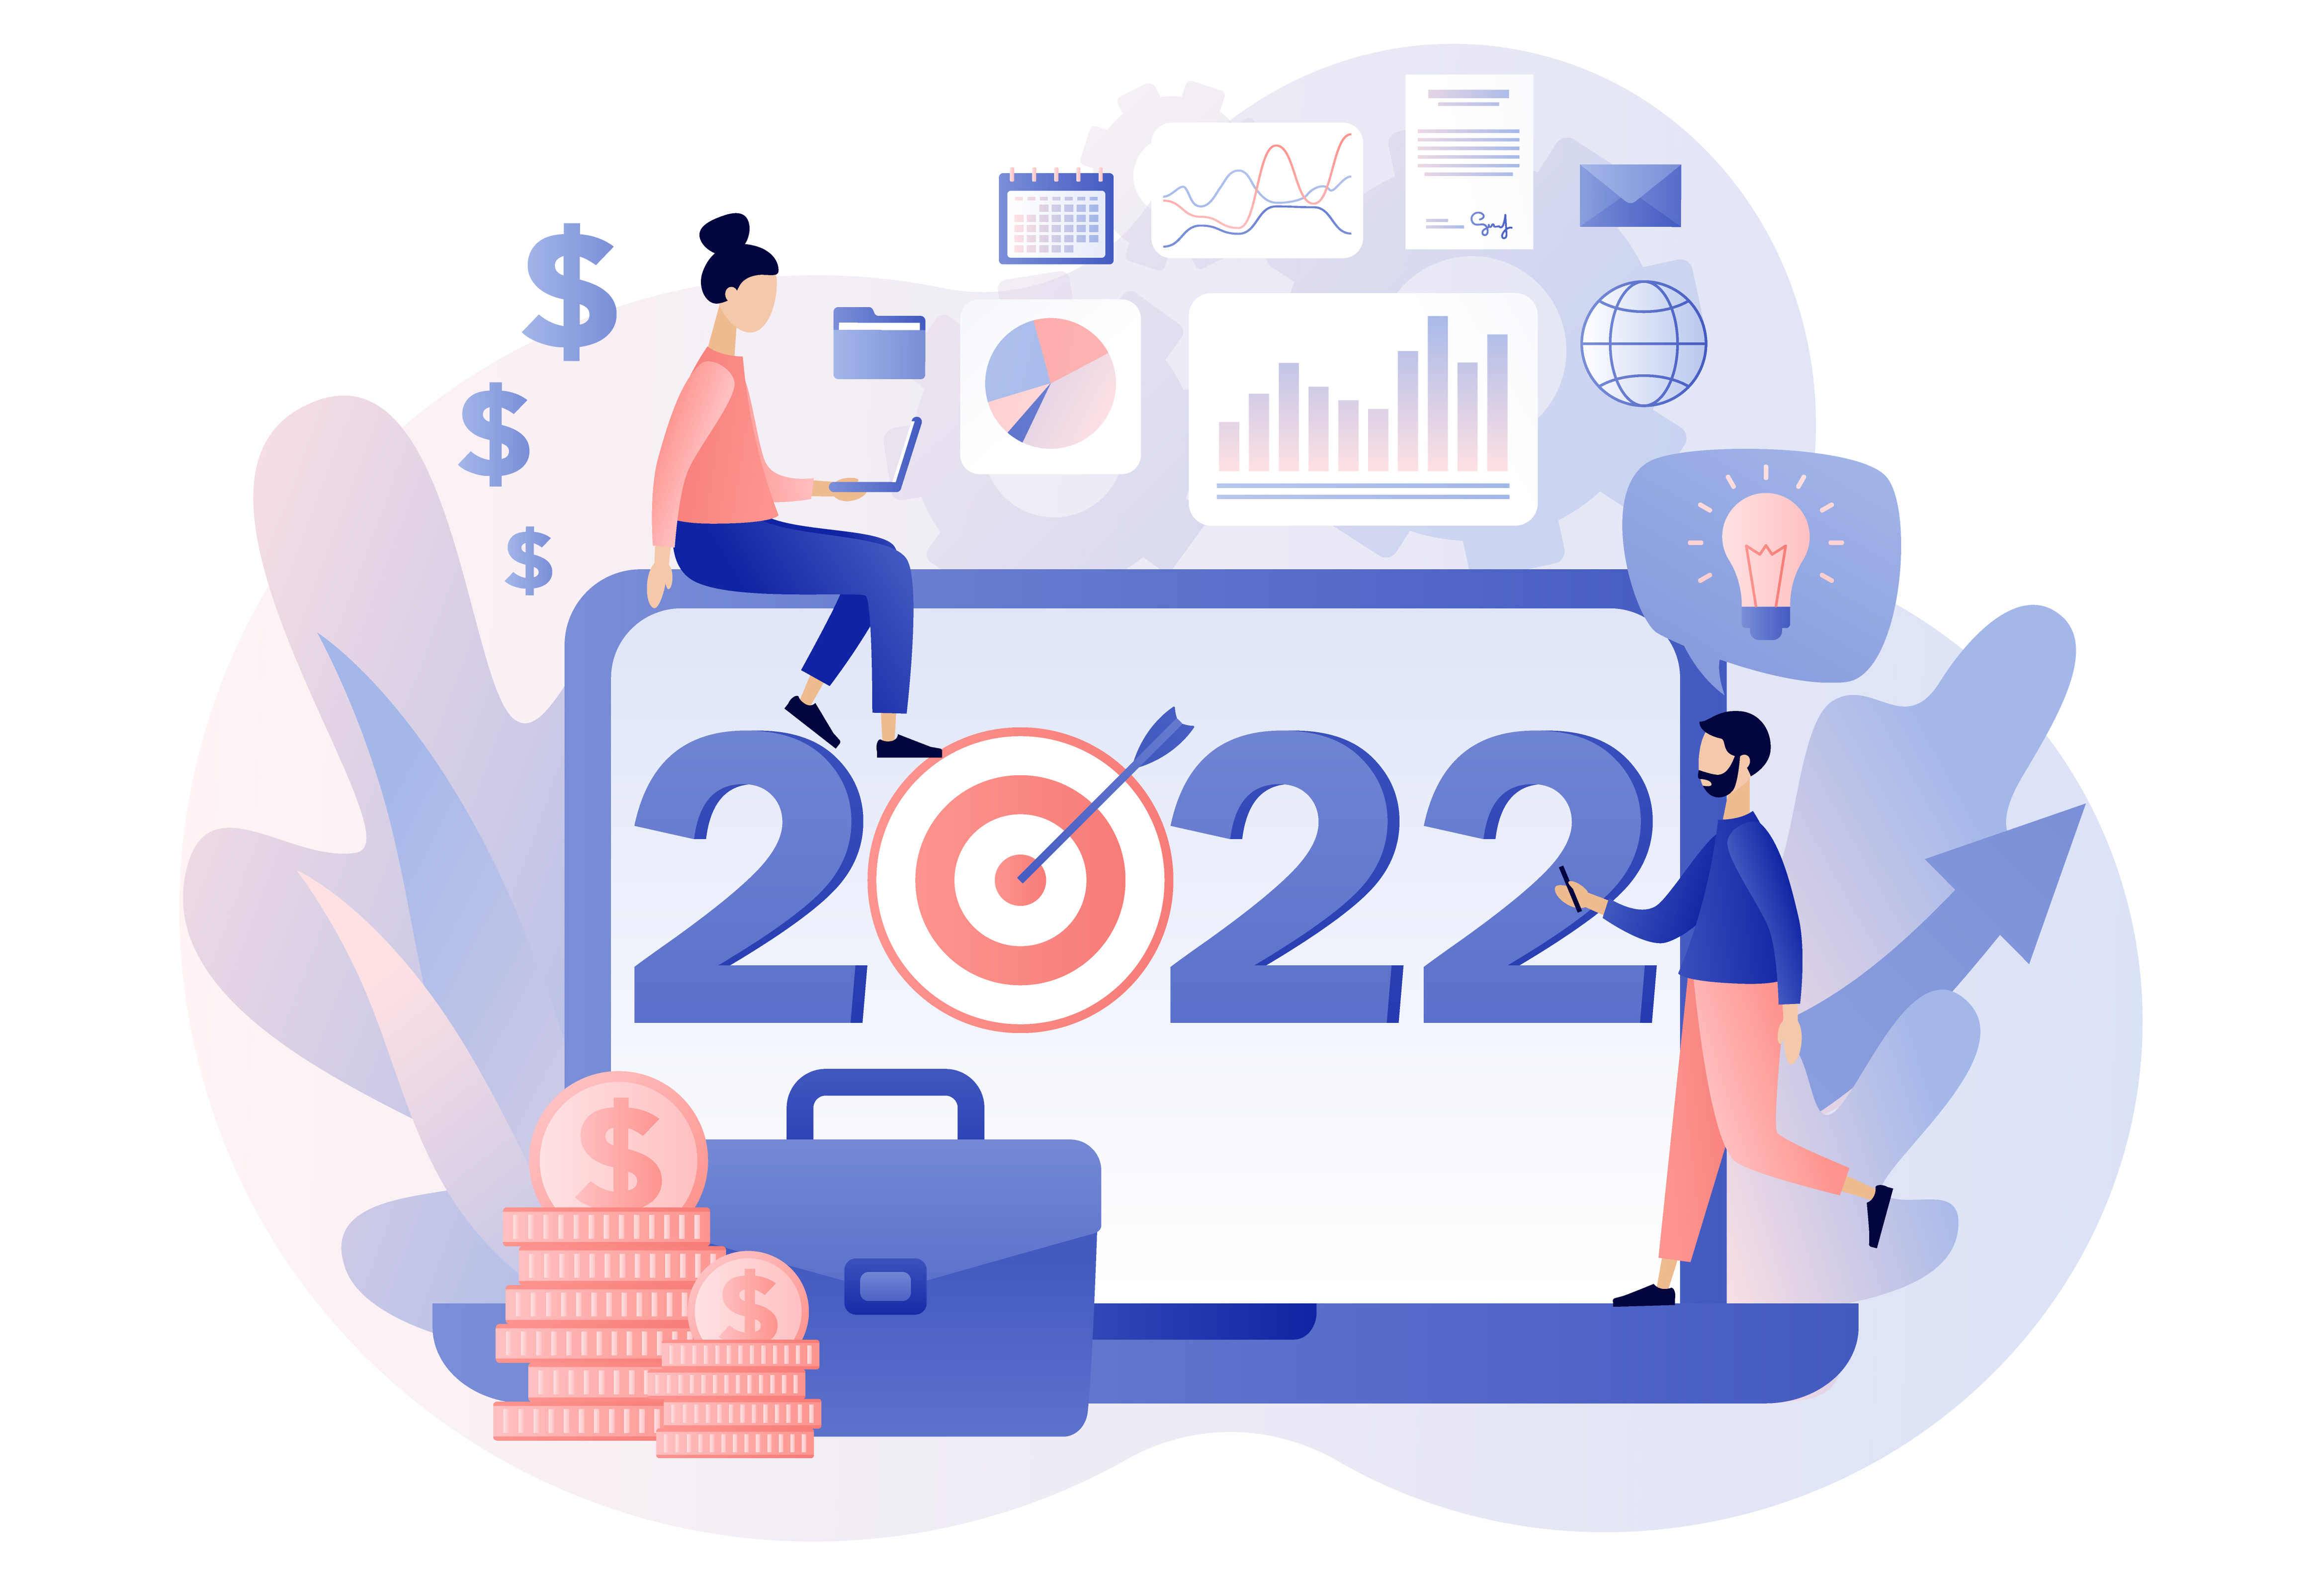 6 Predictions for Contact Center Trends in 2022